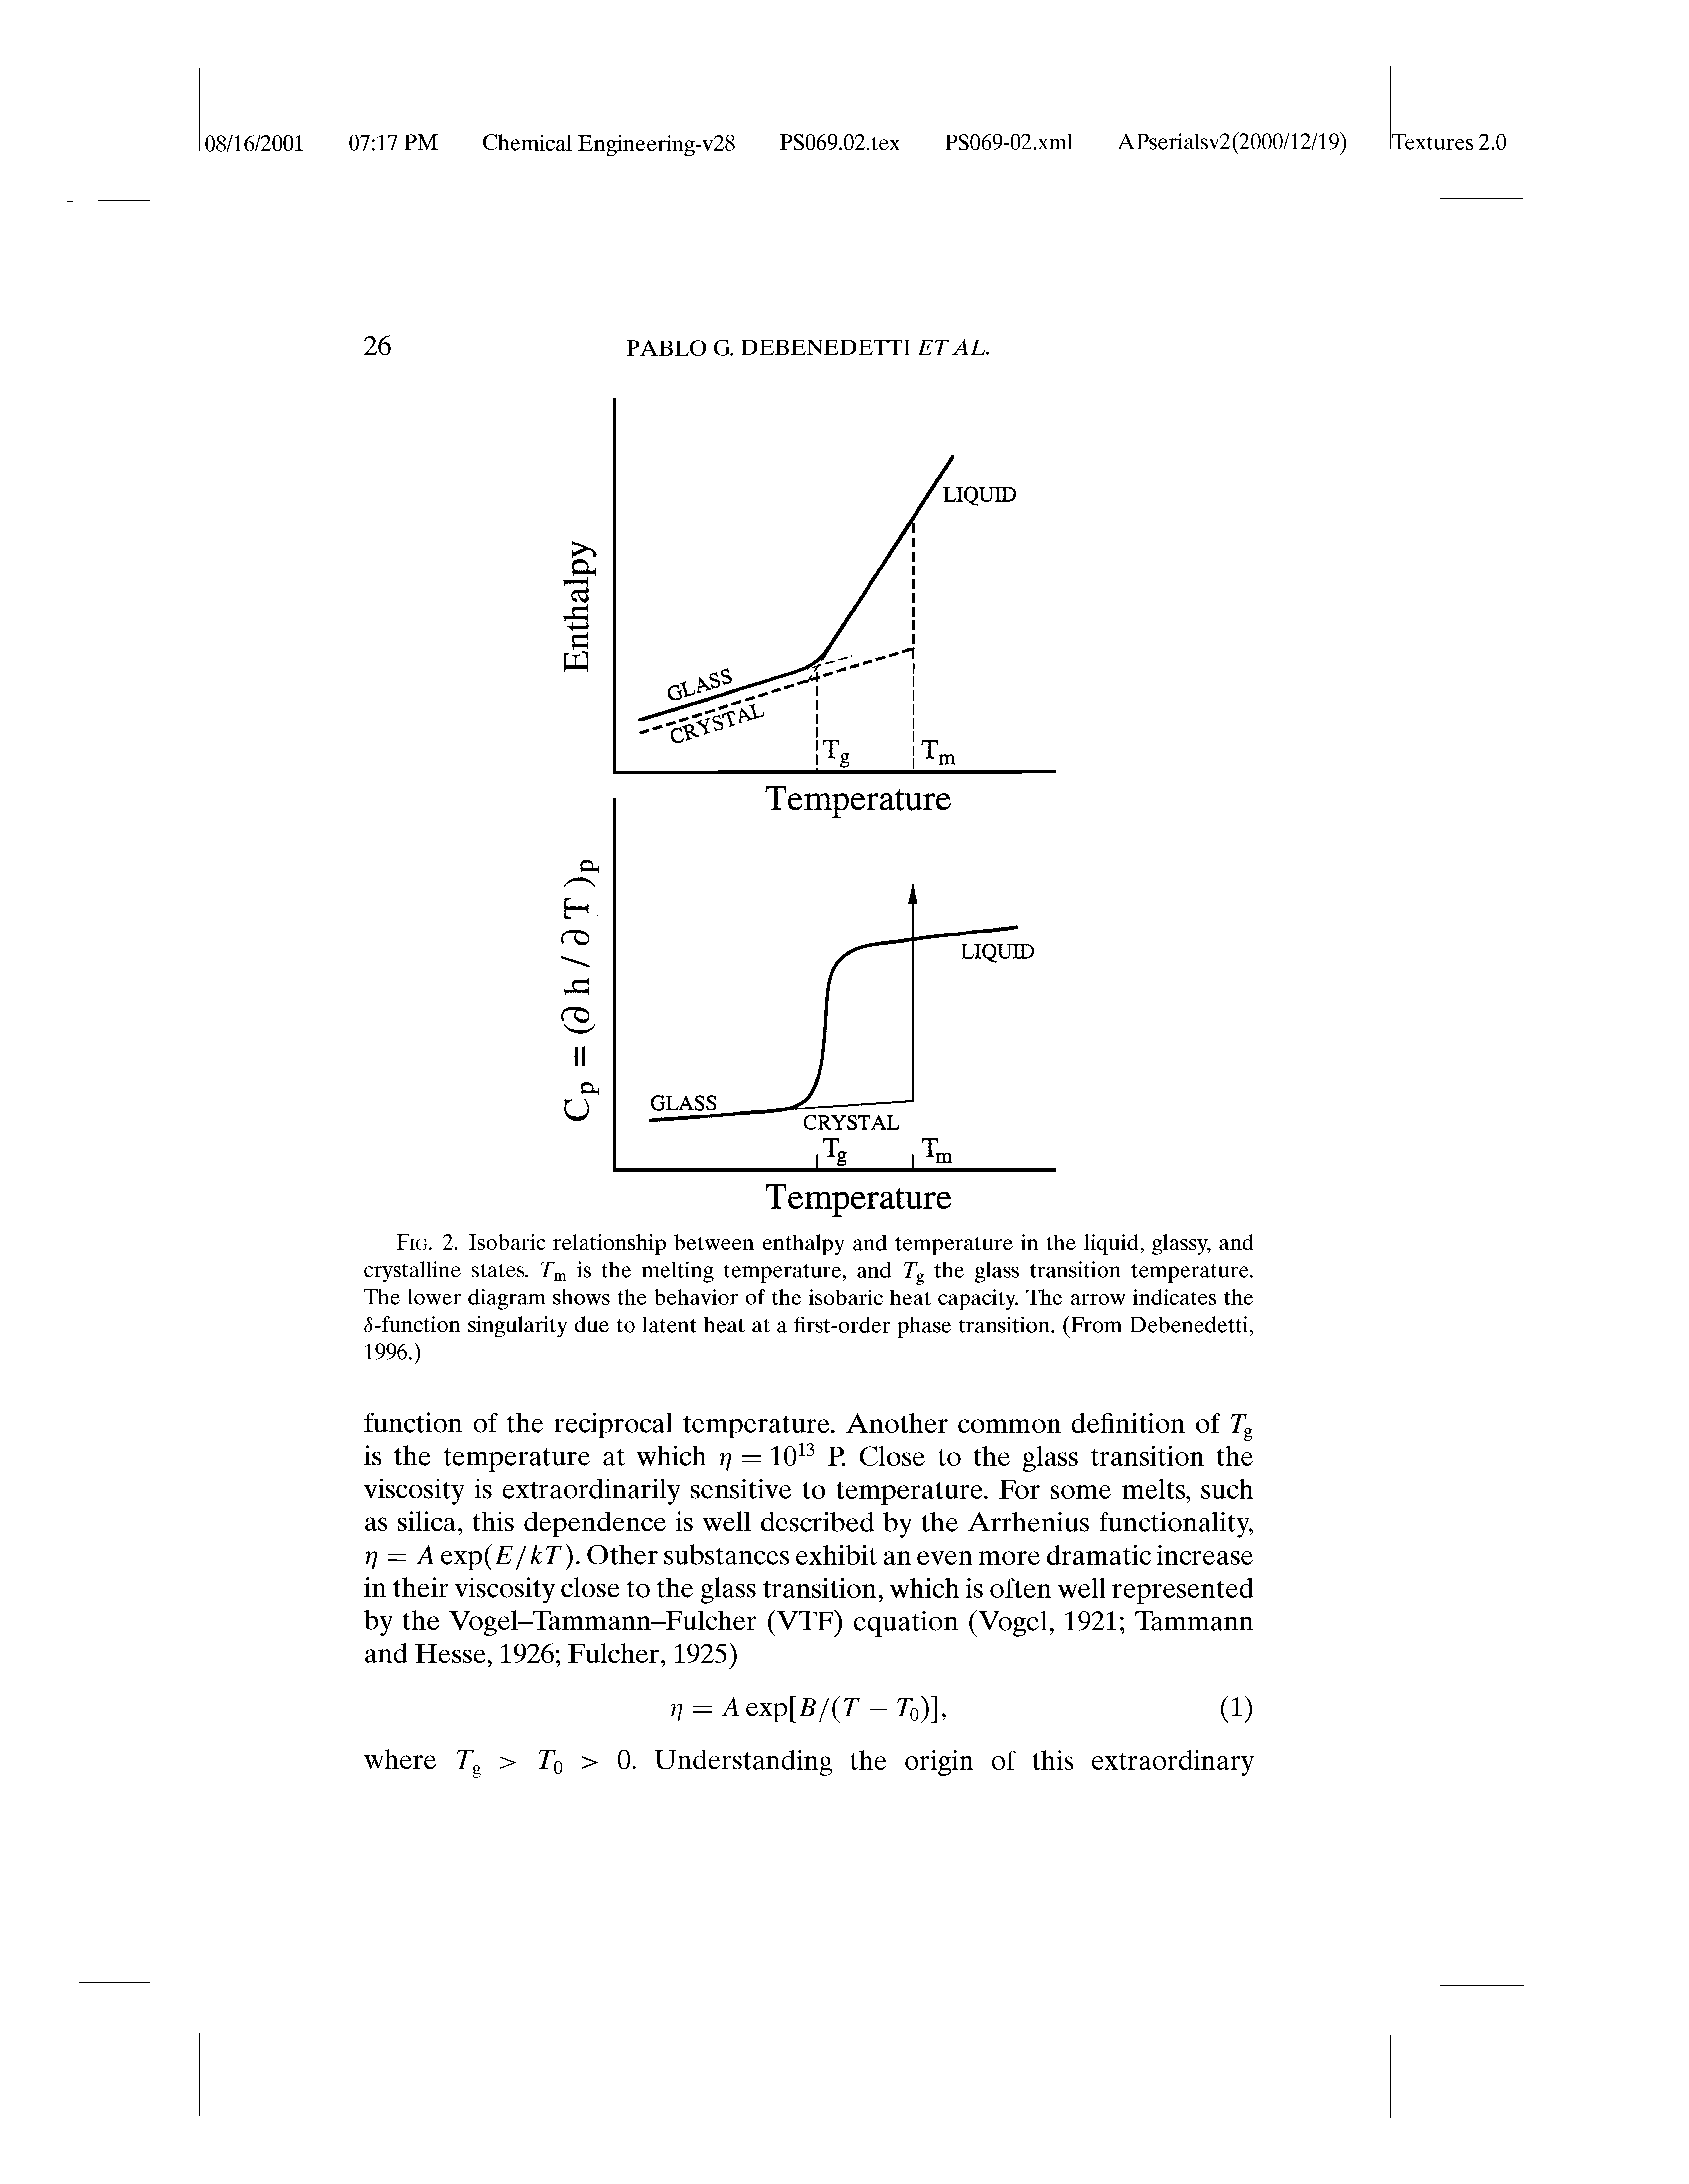 Fig. 2. Isobaric relationship between enthalpy and temperature in the liquid, glassy, and crystalline states. is the melting temperature, and Fg the glass transition temperature. The lower diagram shows the behavior of the isobaric heat capacity. The arrow indicates the -function singularity due to latent heat at a first-order phase transition. (From Debenedetti, 1996.)...